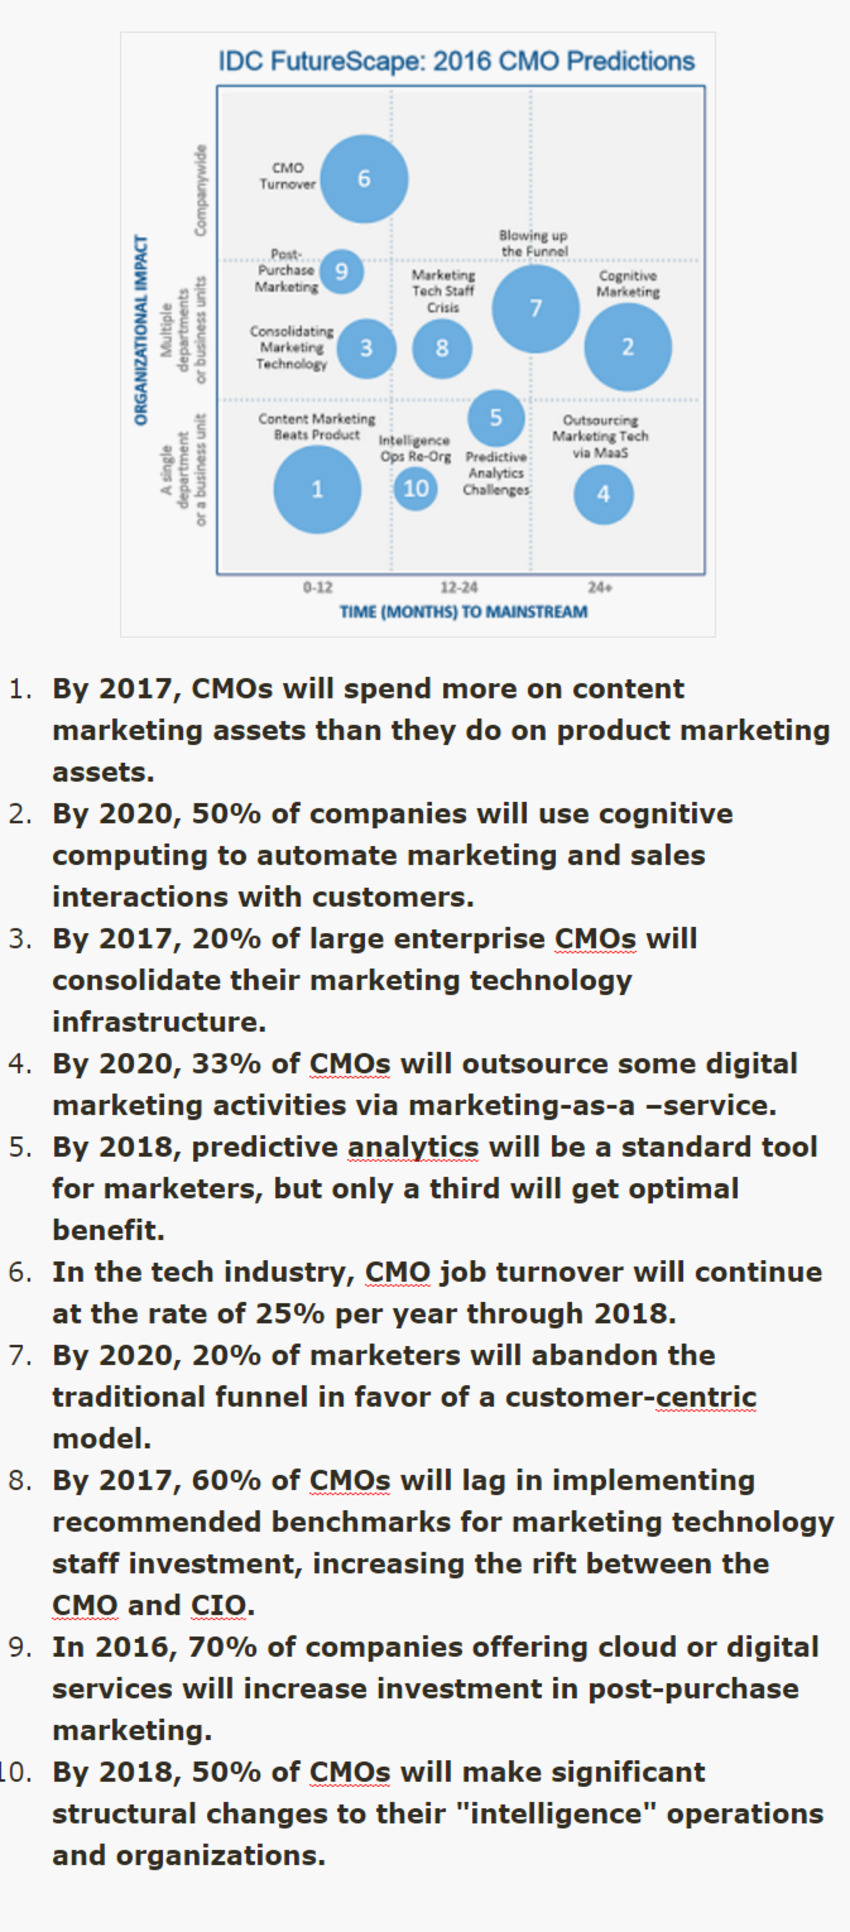 IDC CMO FutureScape: Predictions for 2016 and the Digital Transformation | The MarTech Digest | Scoop.it